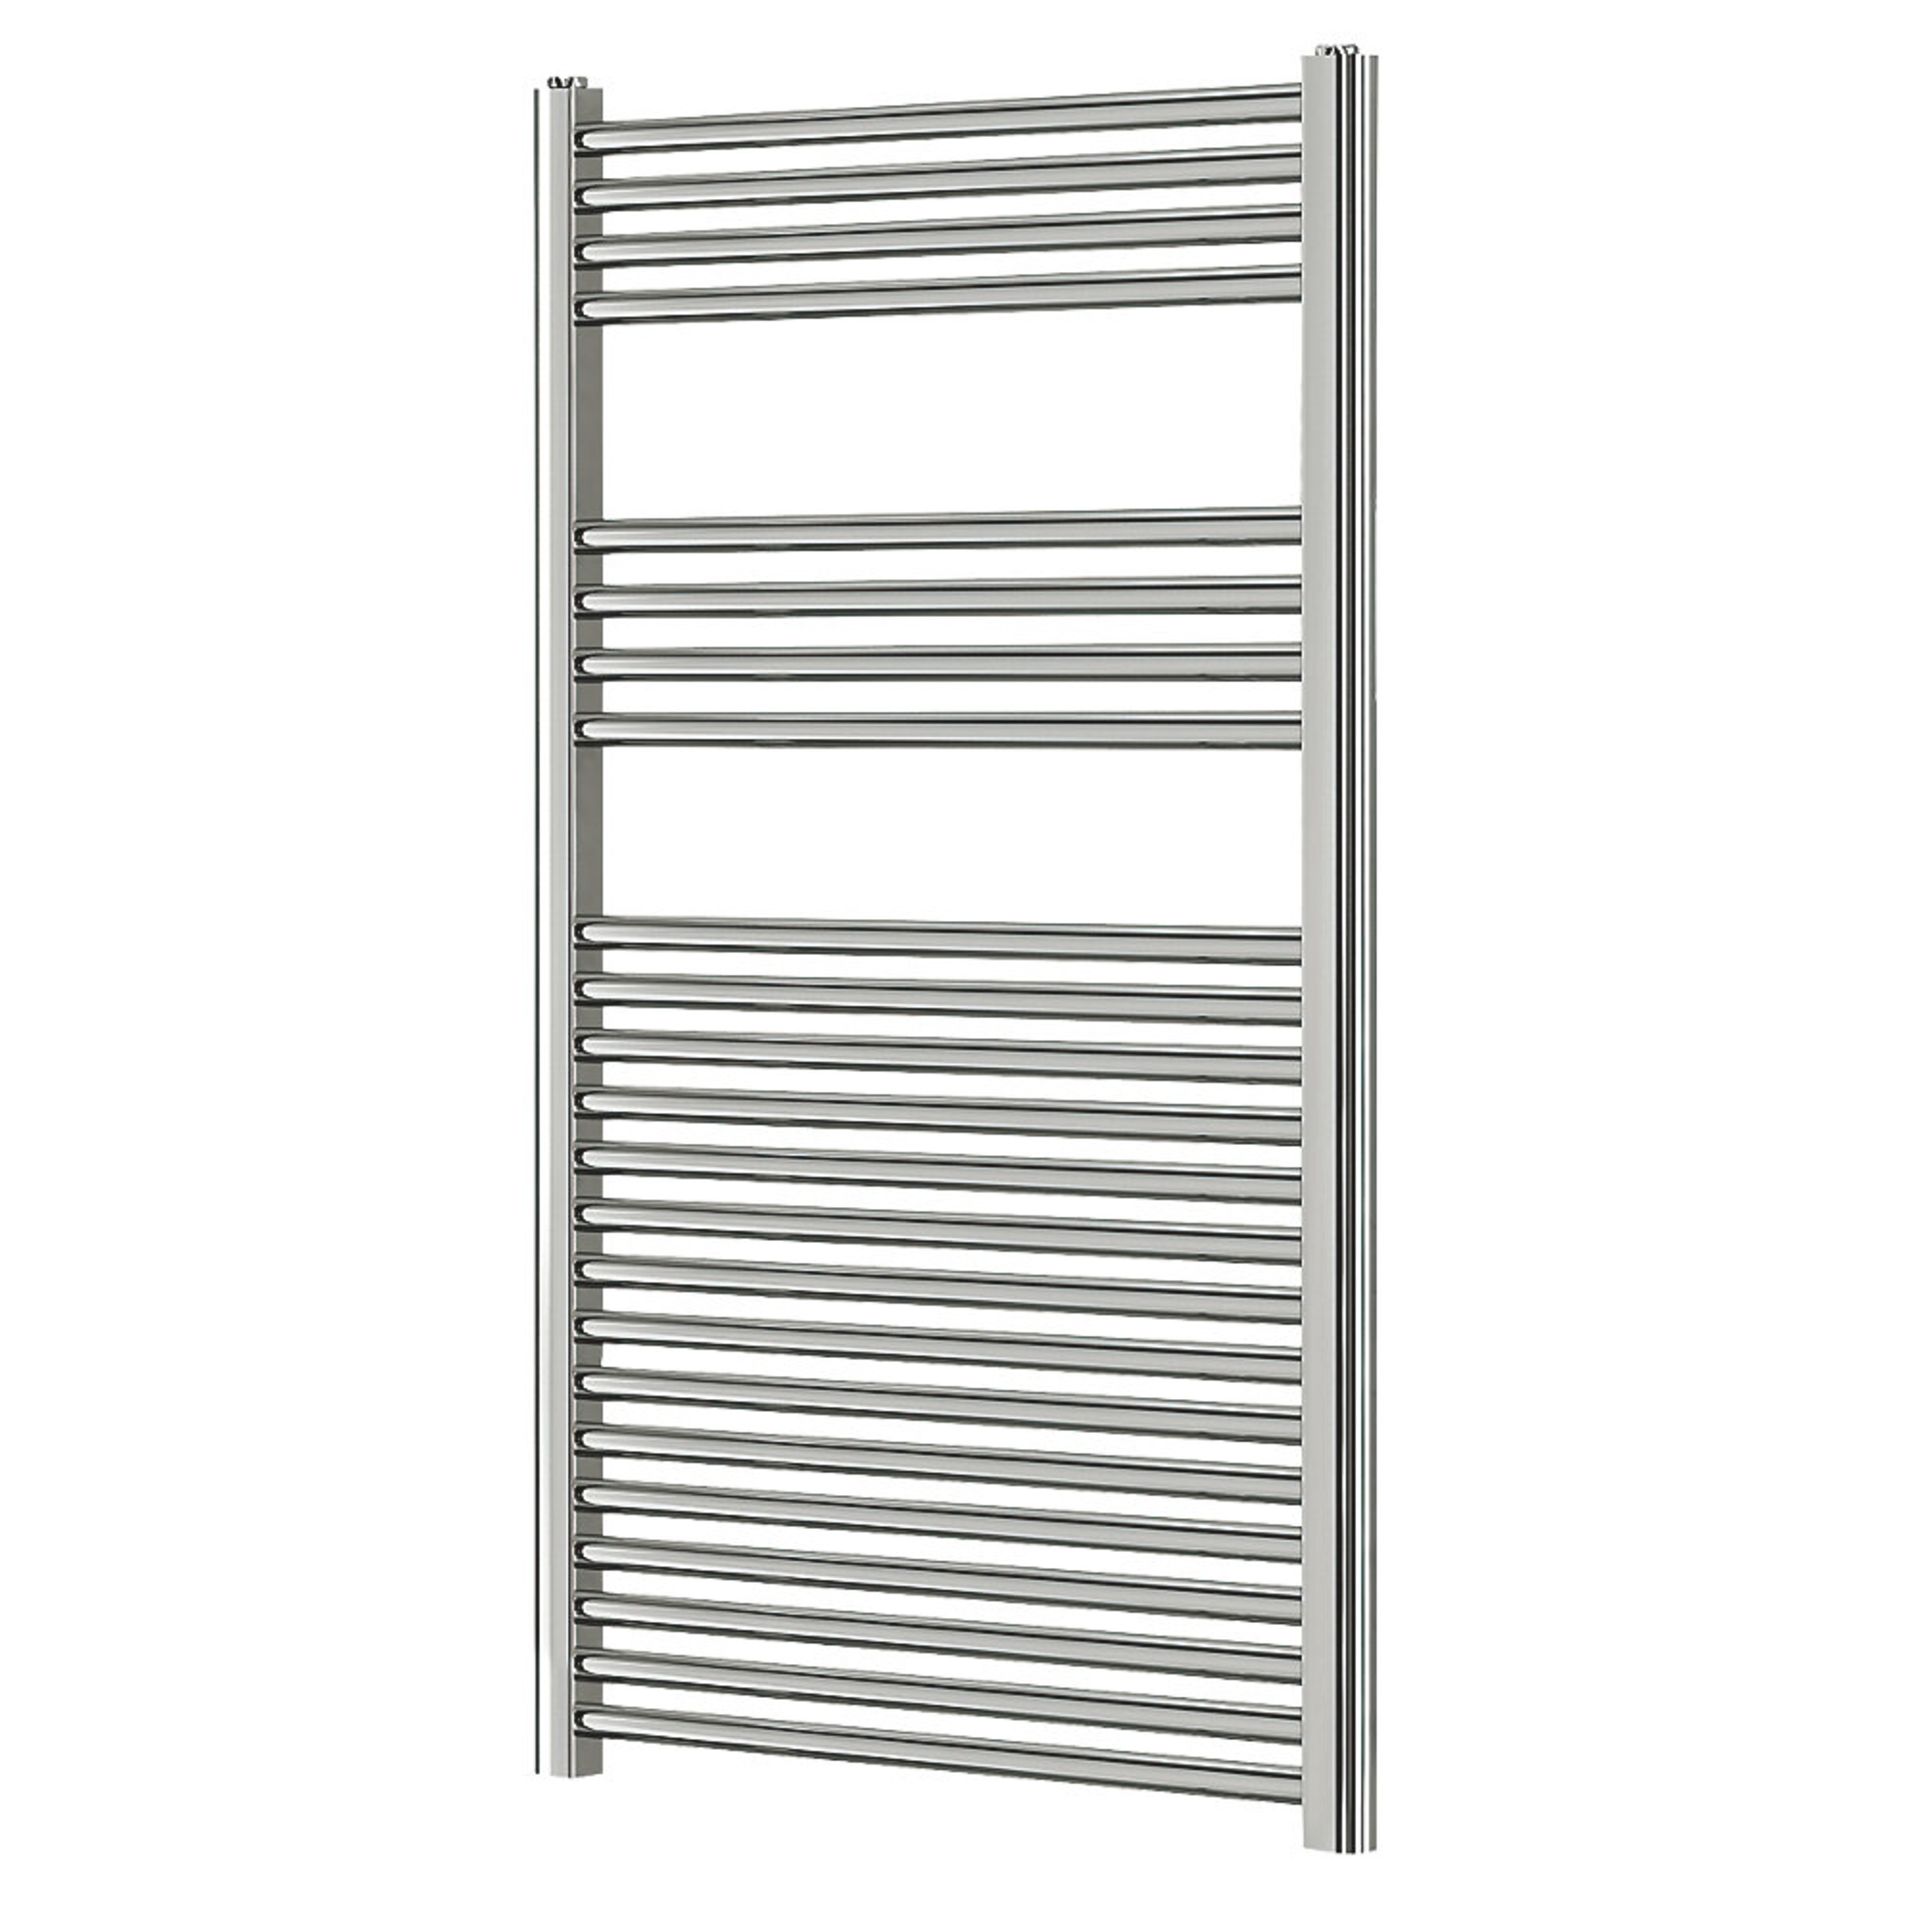 (MC214) 1200 X 600MM TOWEL RADIATOR CHROME. High quality chrome-plated steel construction. This - Image 2 of 2